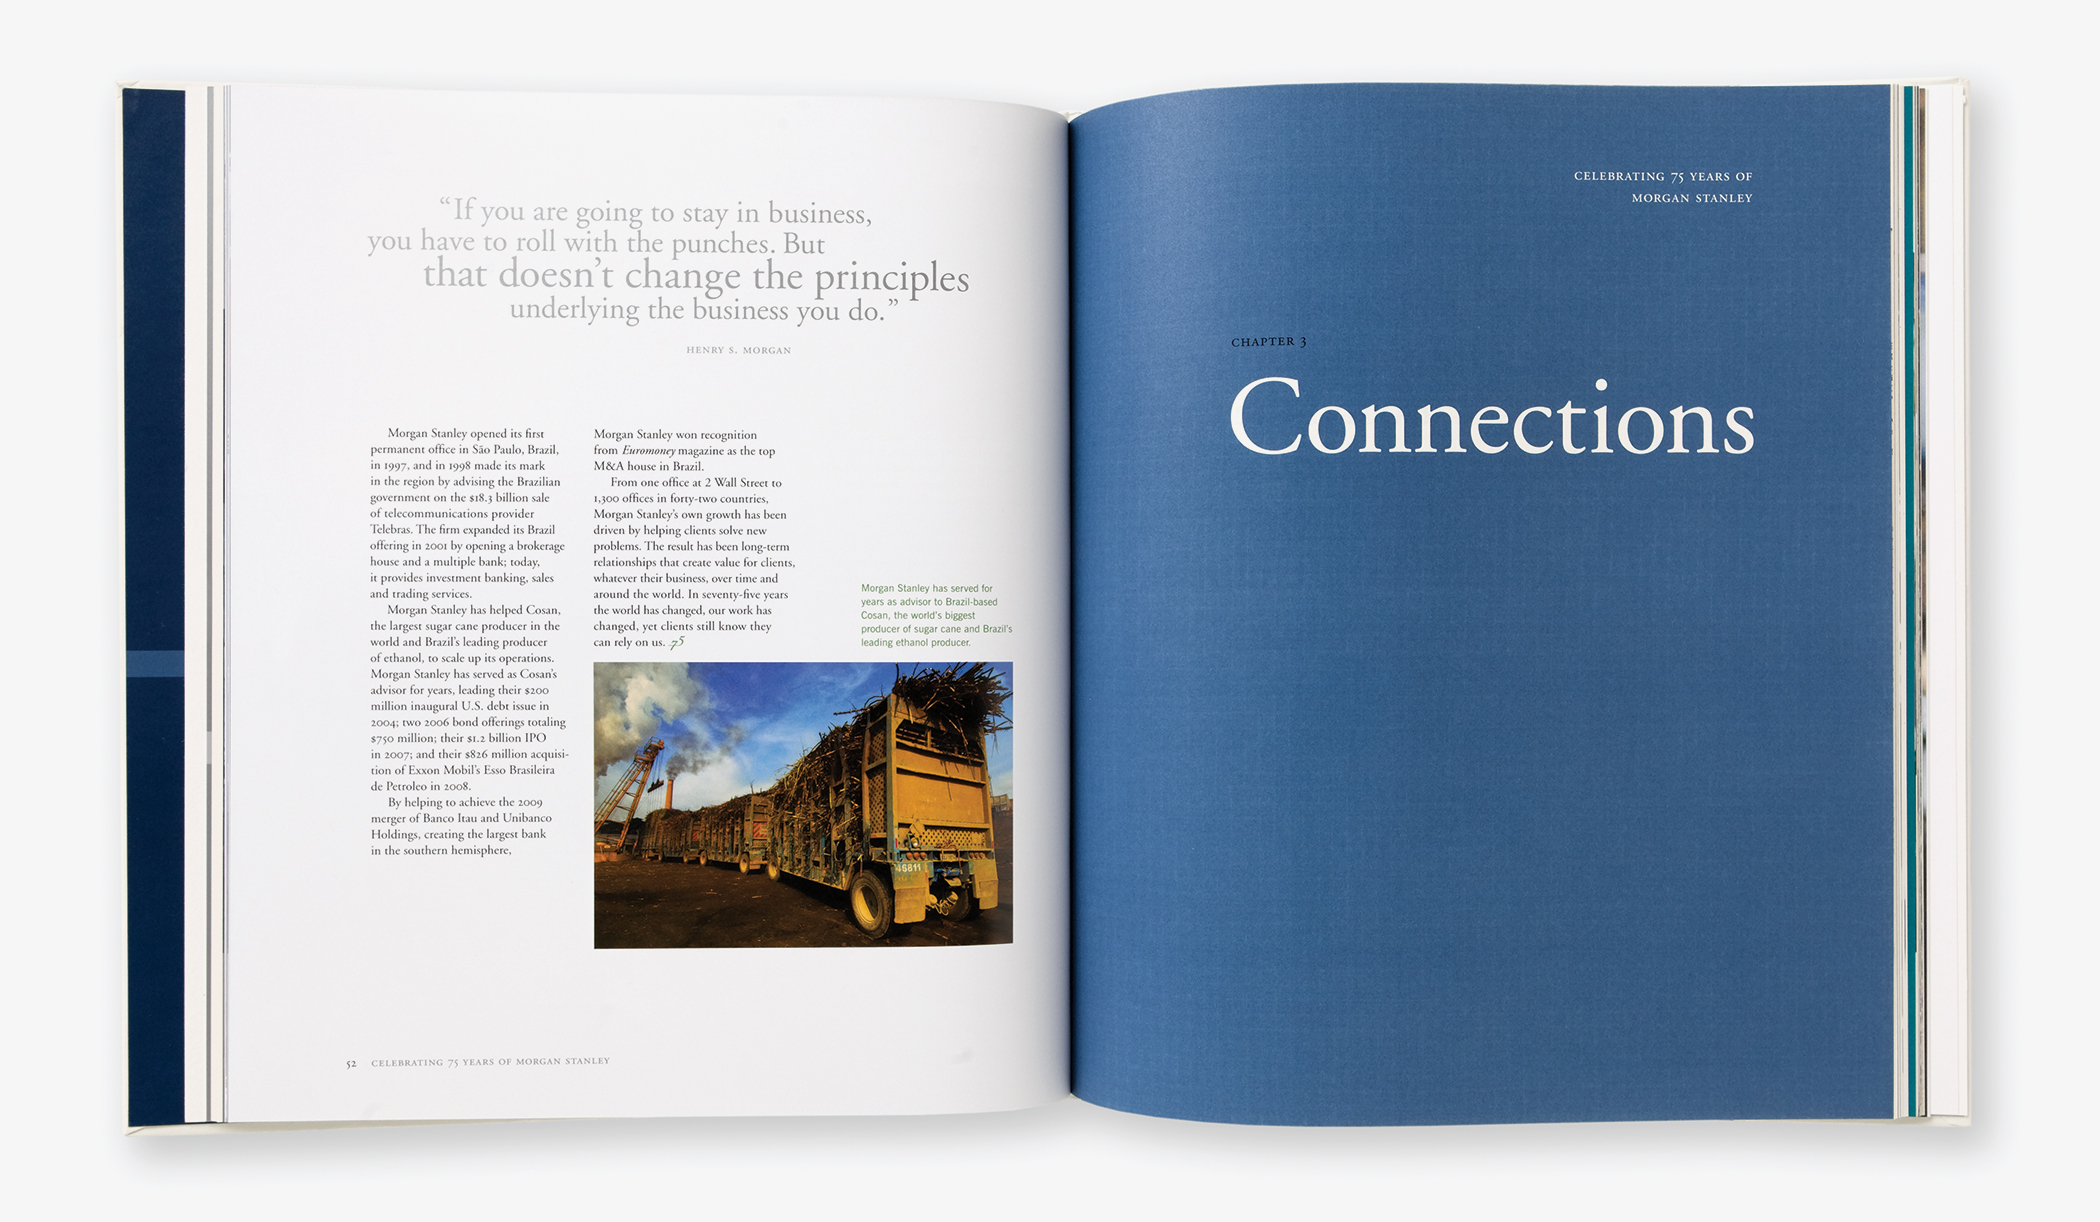 A chapter divider page from the Morgan Stanley 75th anniversary commemorative book with the title, Connections.